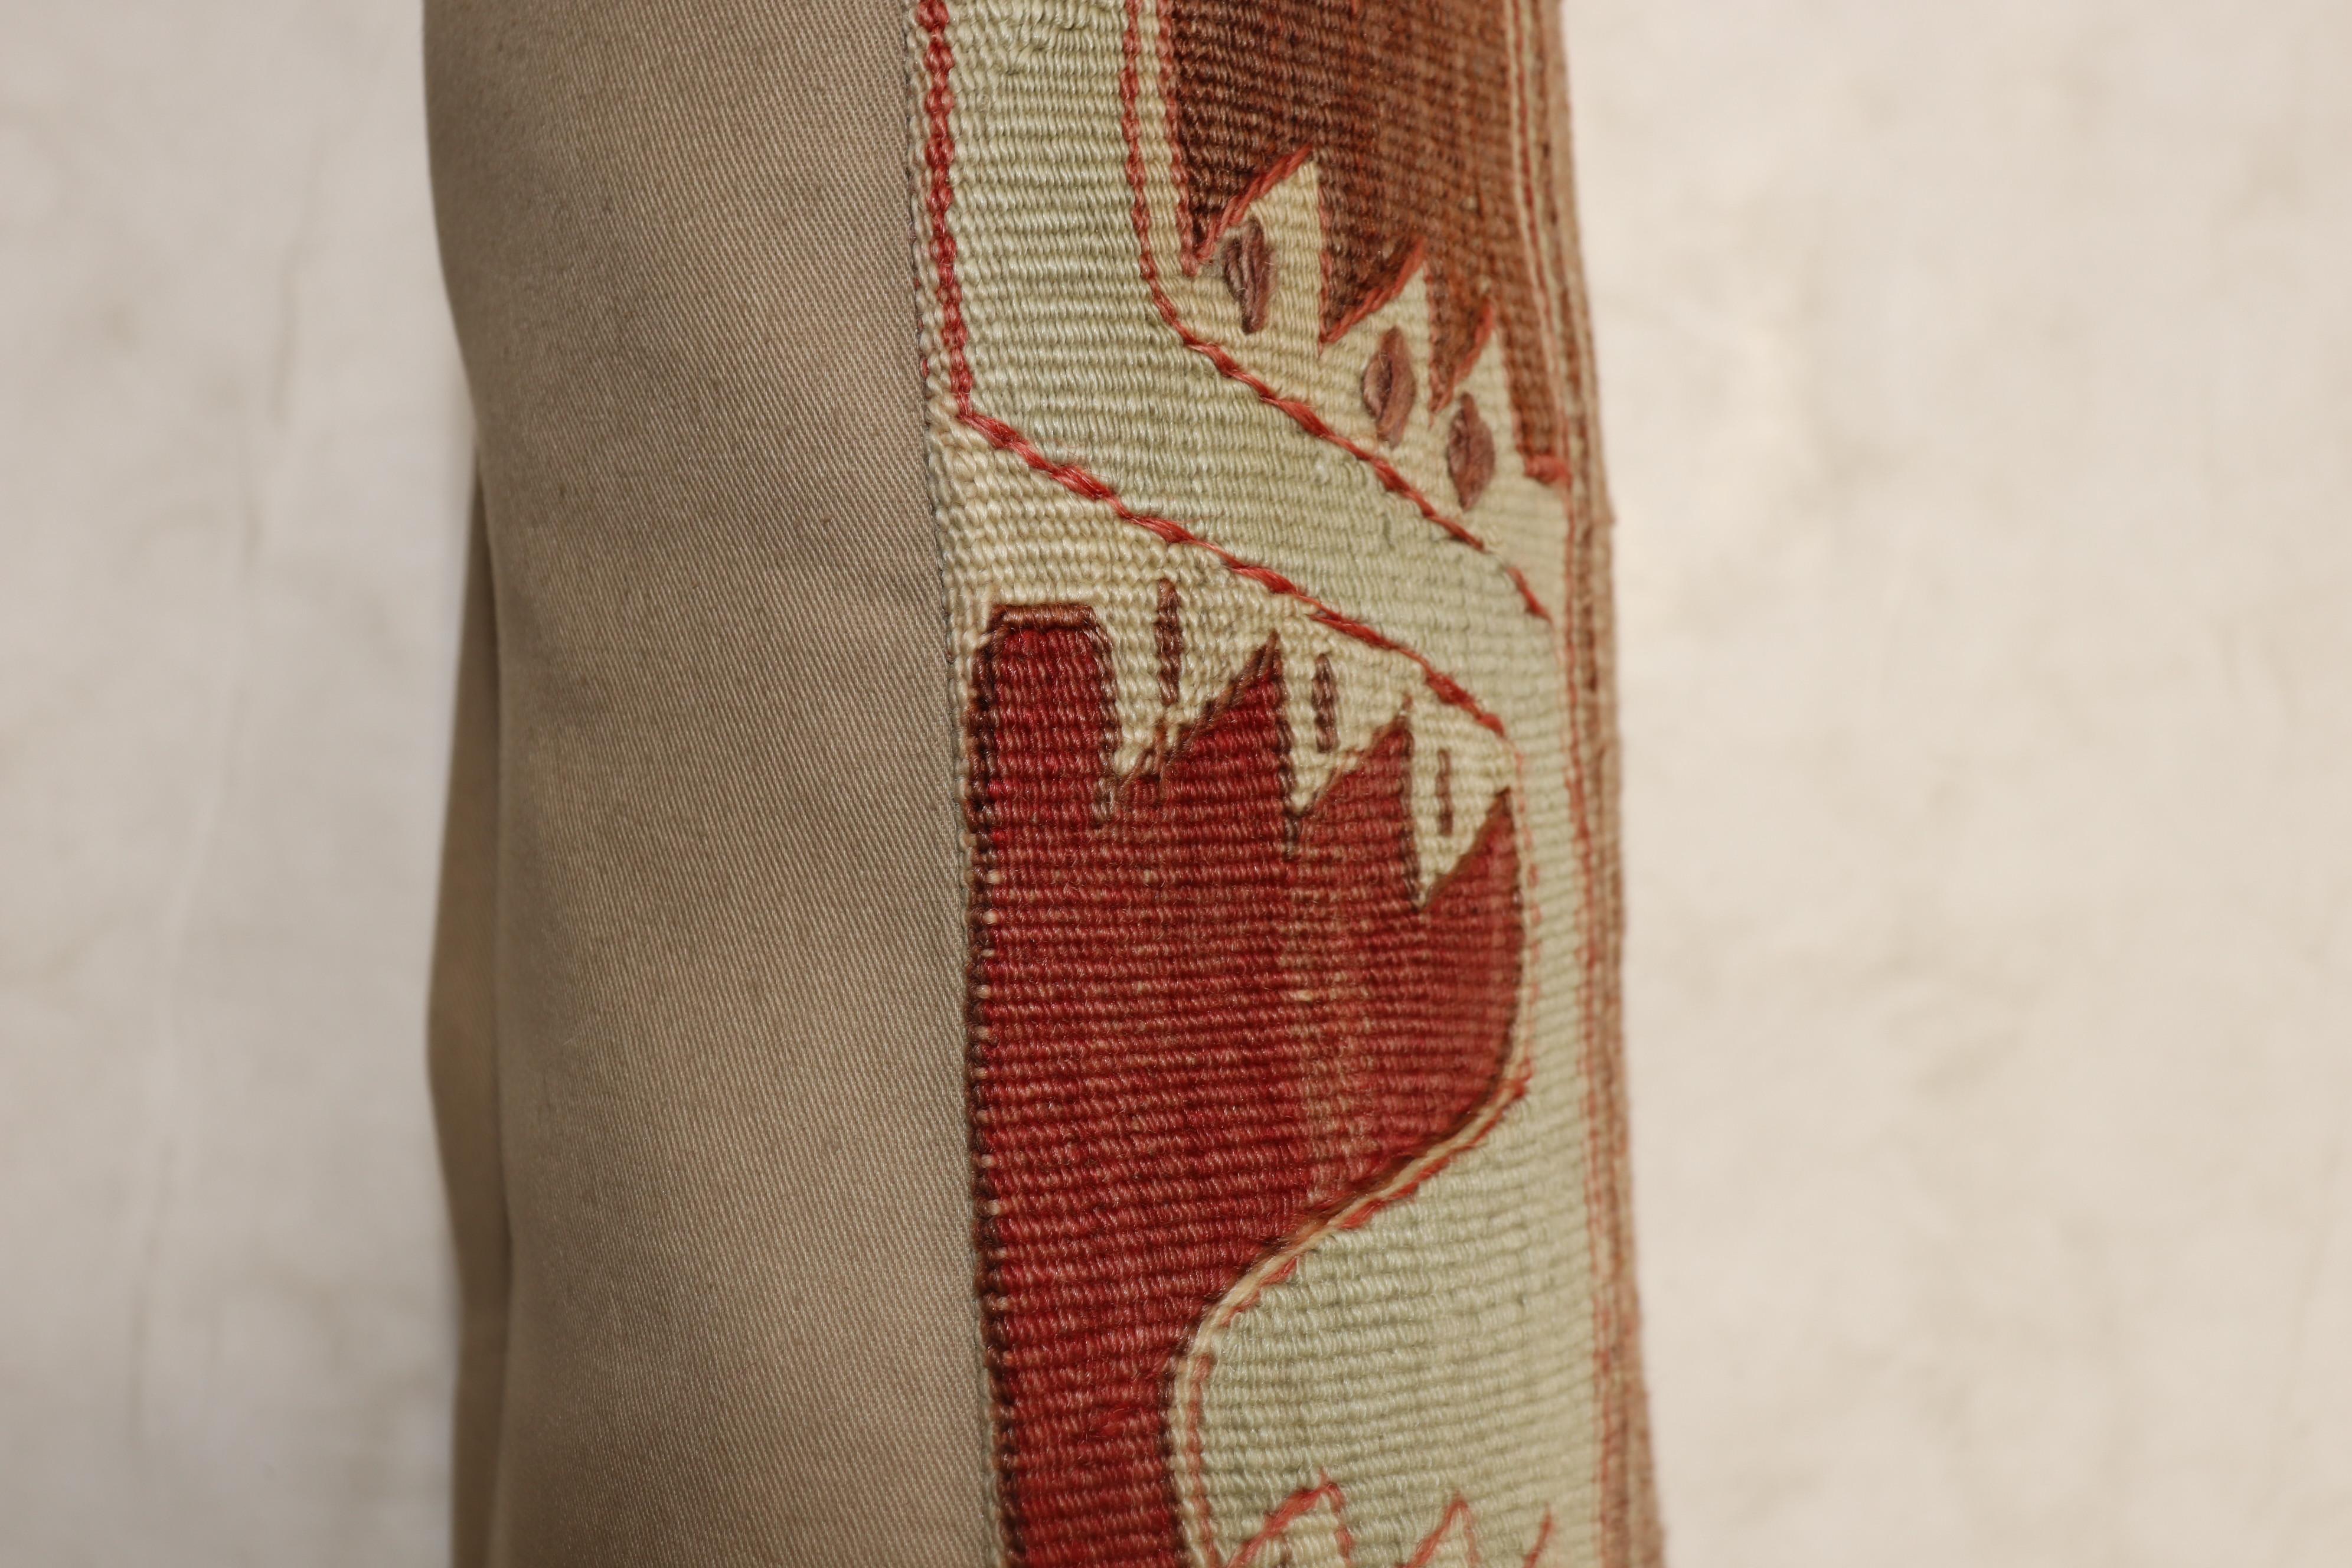 Larger bolster size pillow made from a vintage Turkish Kilim flat-weave.

Measures: 16” x 34”.